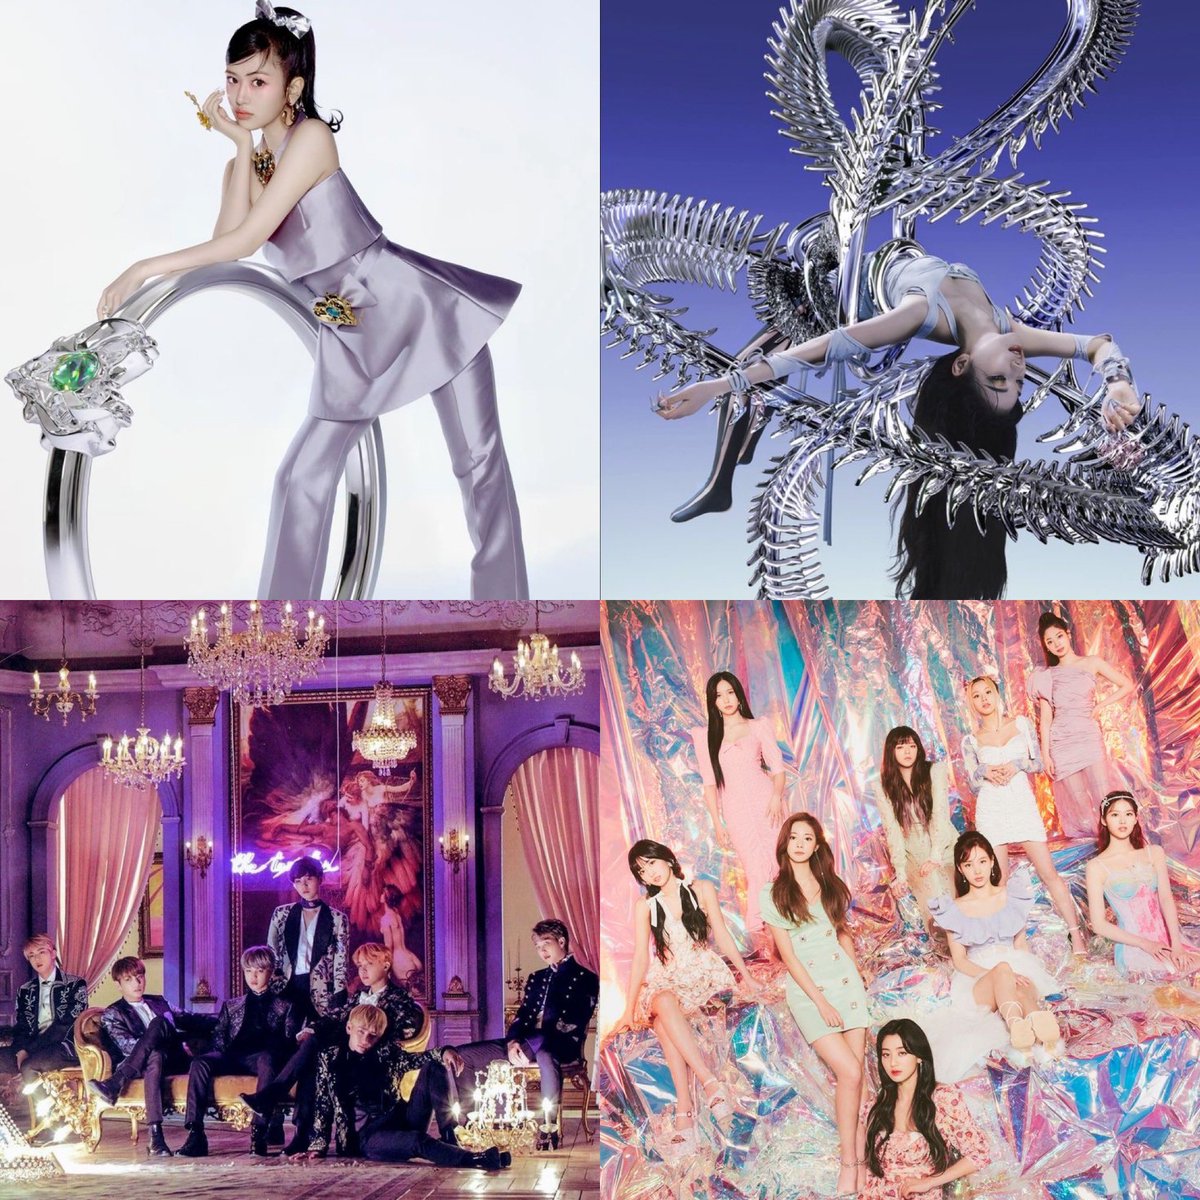 The best concepts photo in Kpop in my opinion - thread